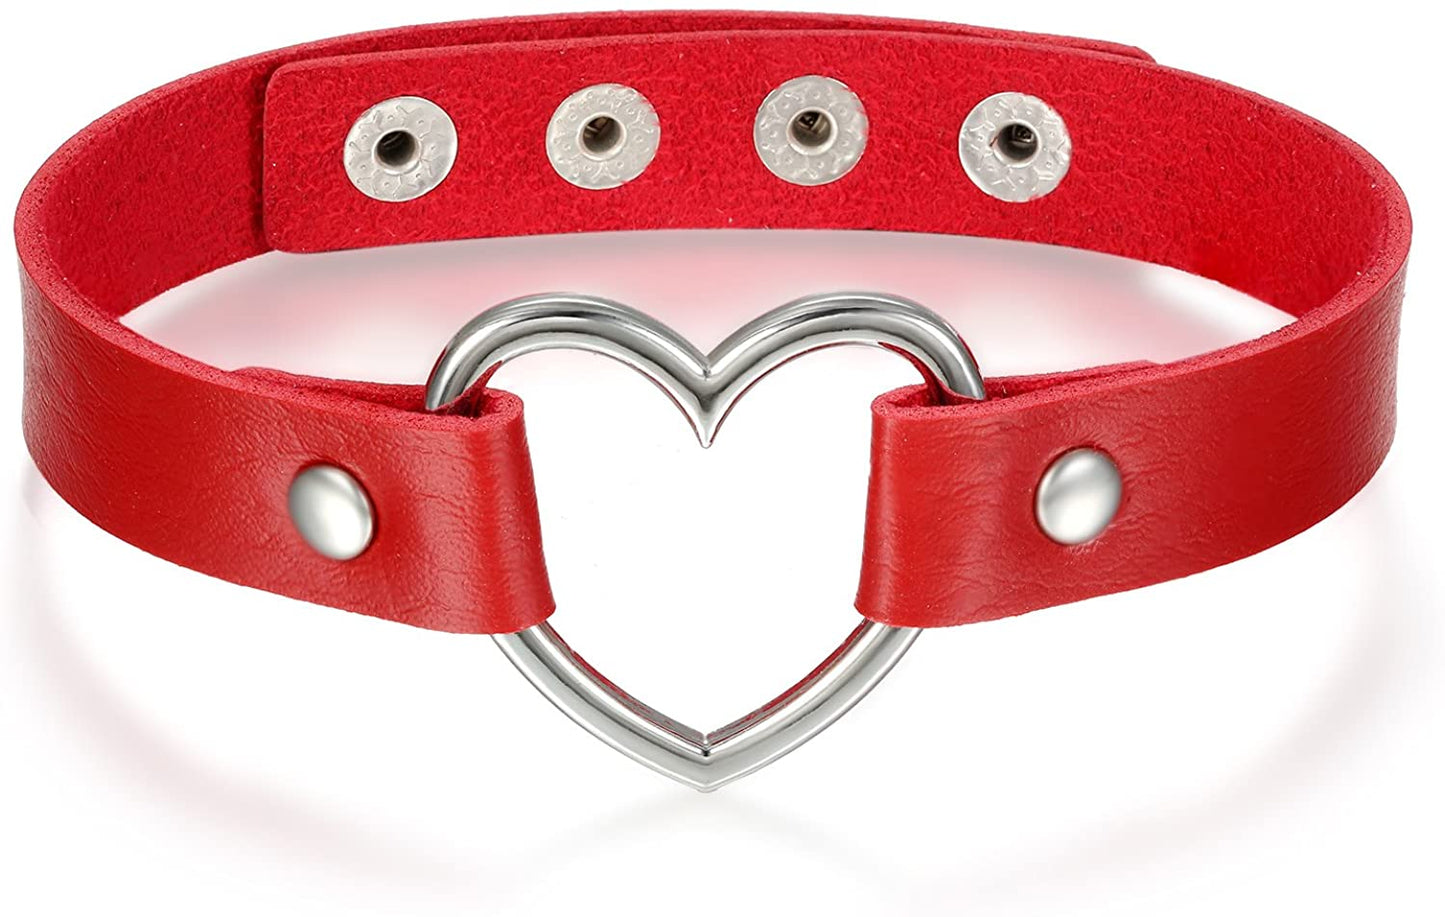 Steel Heart Daytime Red Leather Choker